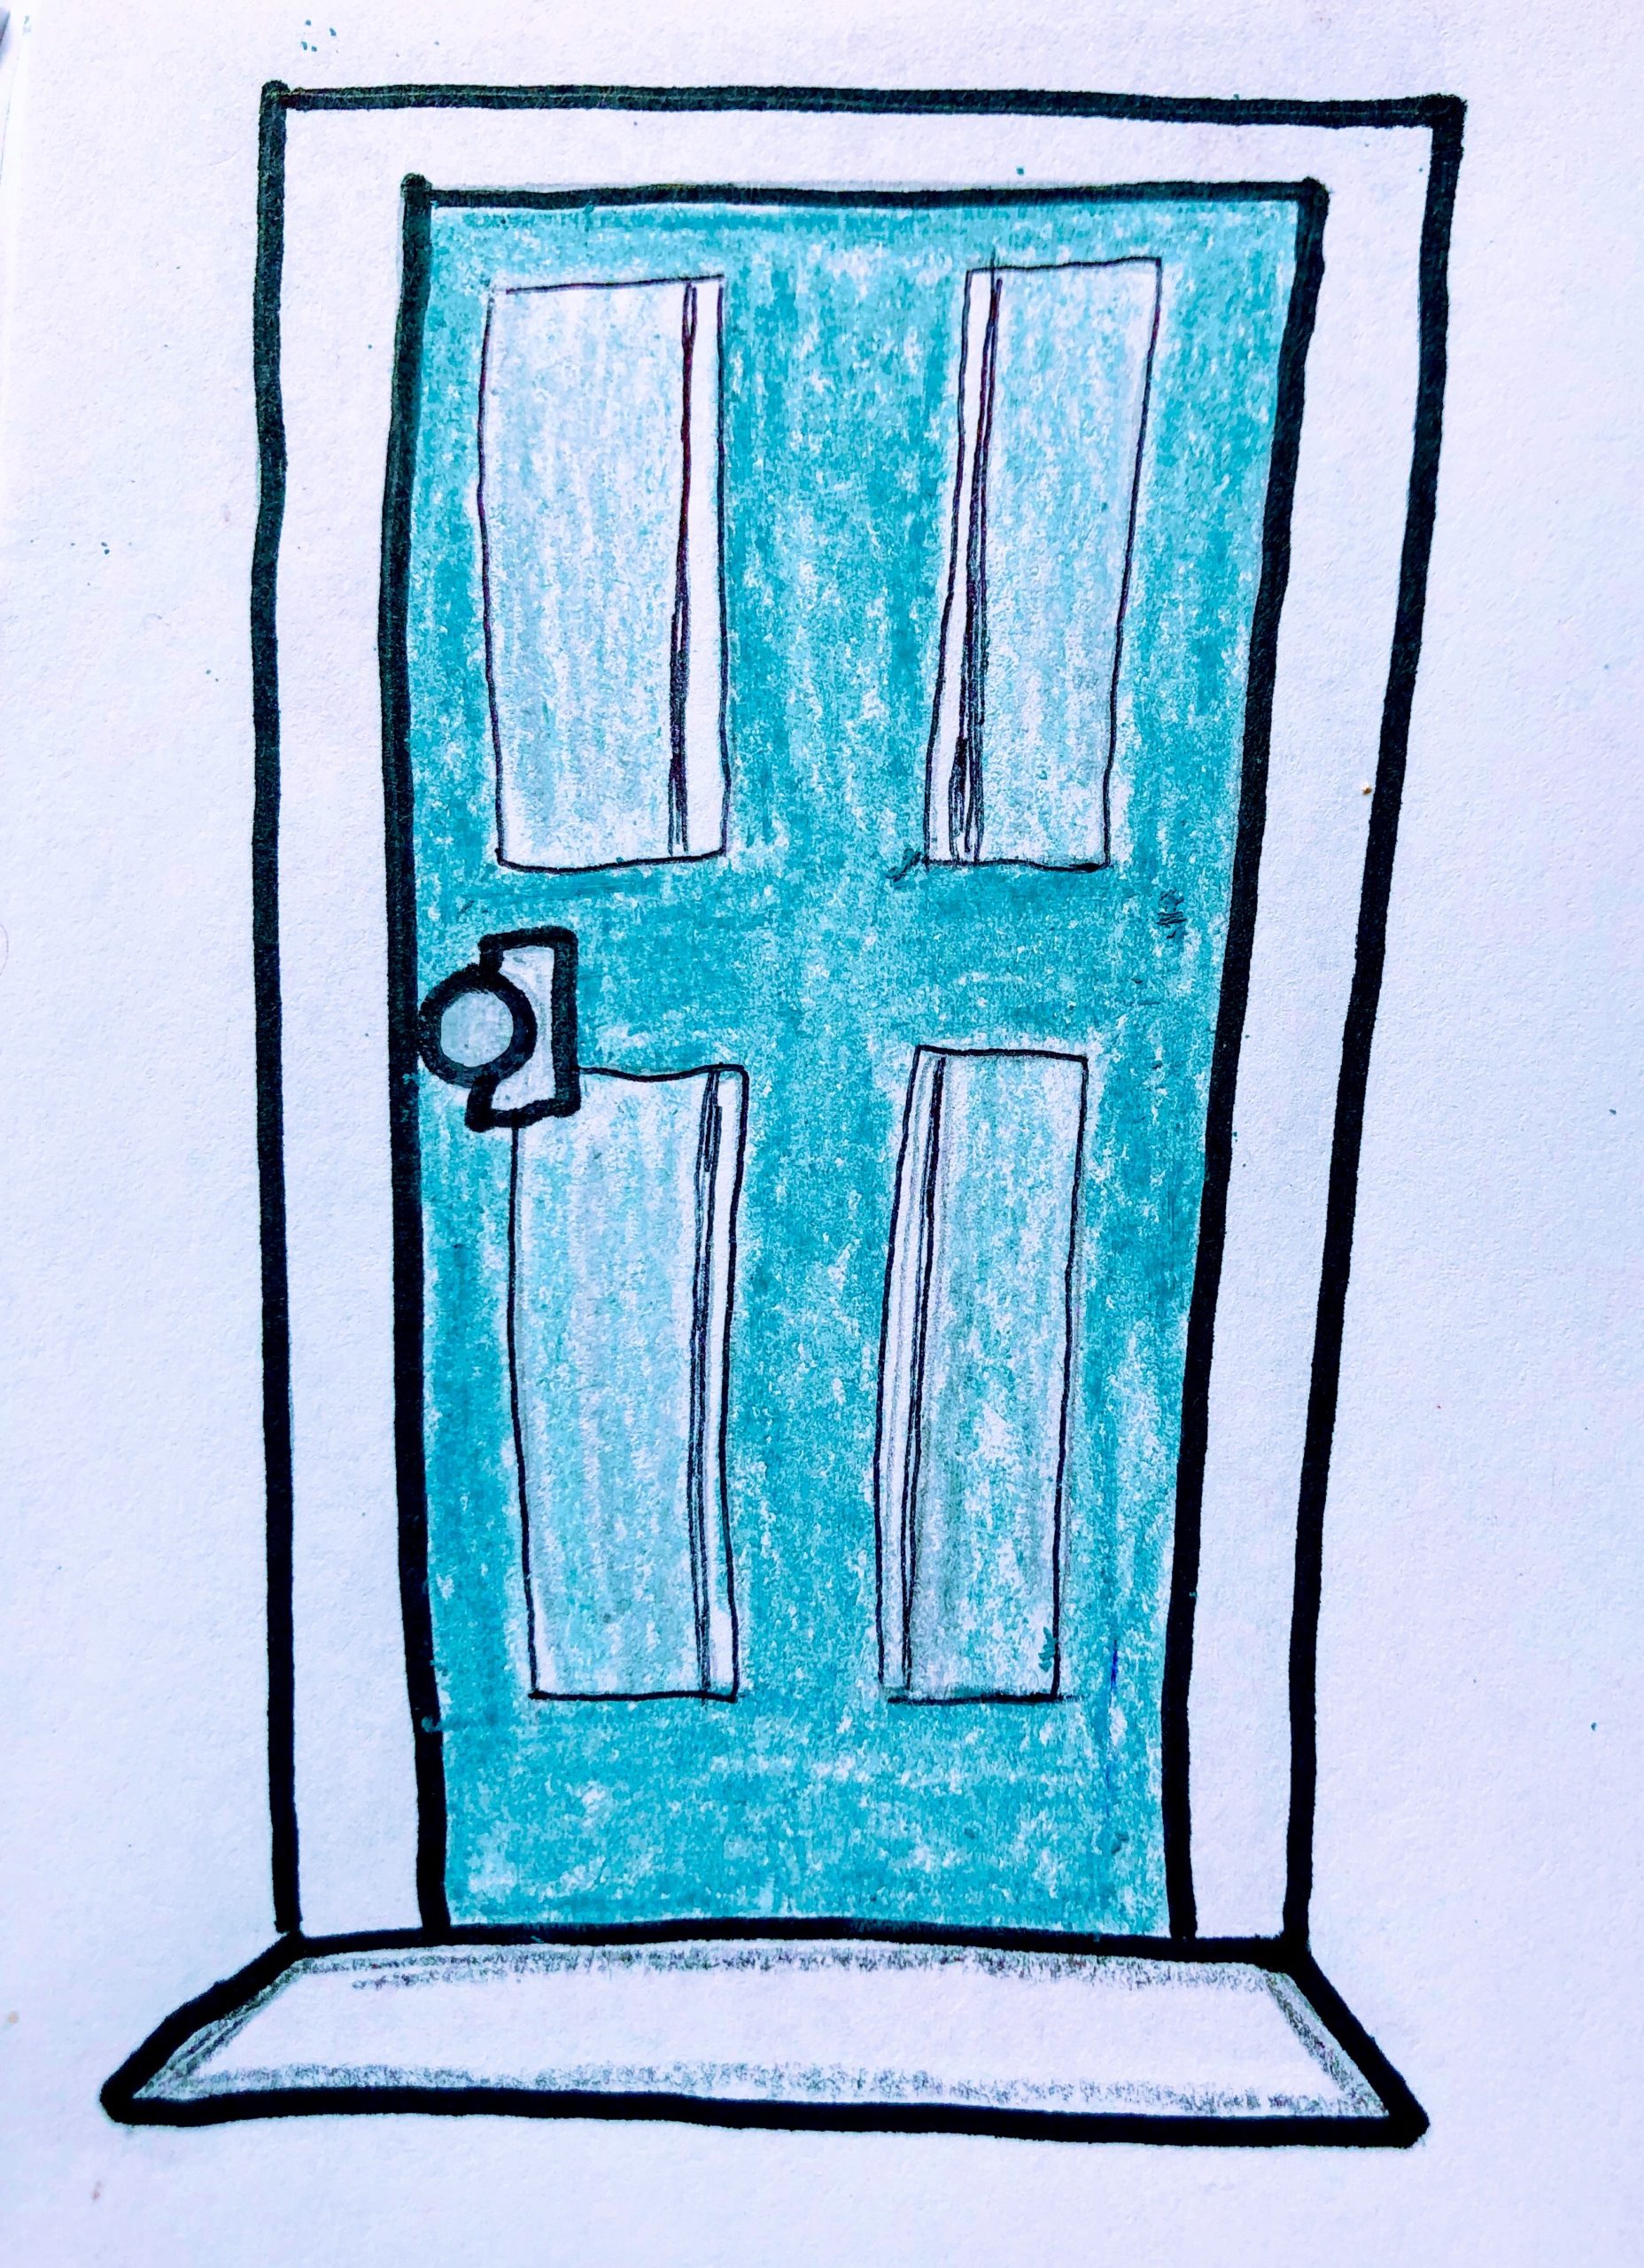 A teal blue door, closed, for the children's story The Night I got Locked in the Bathroom.